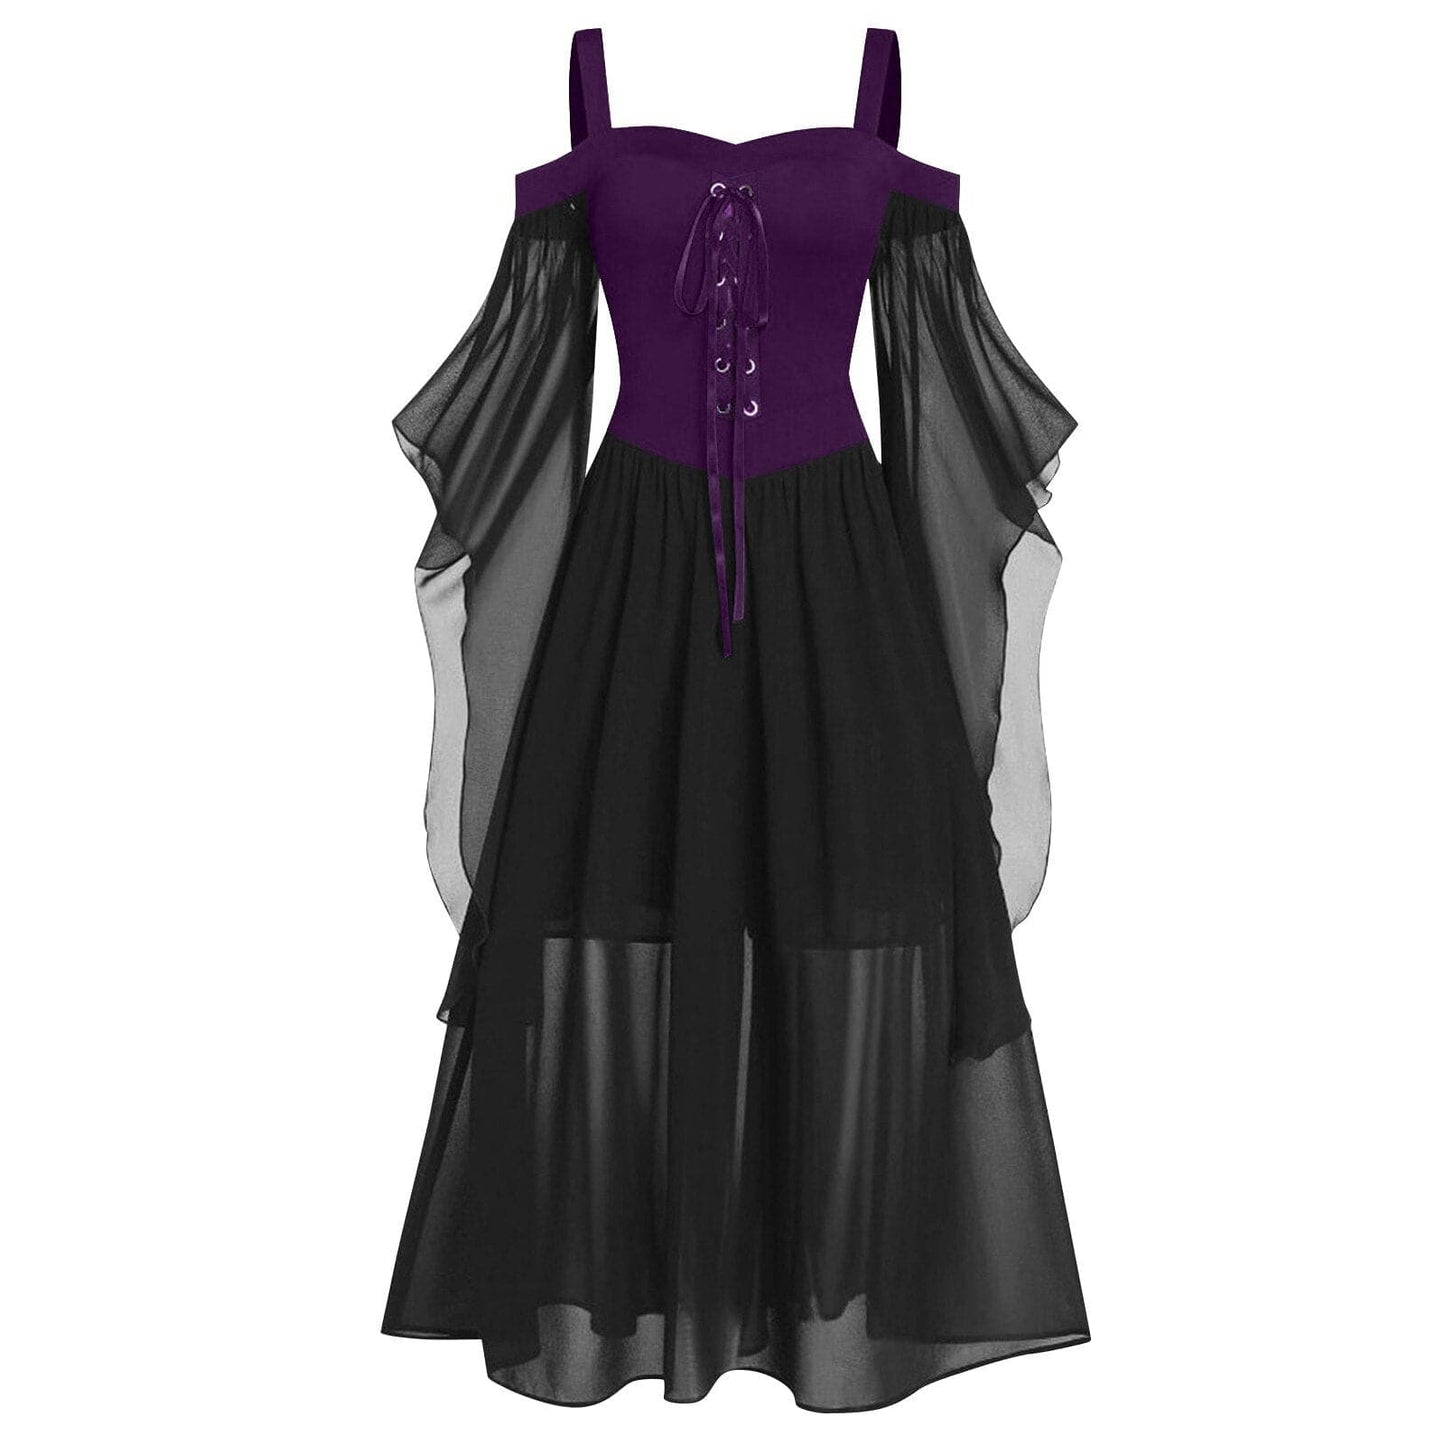 Gothic Medieval Dress - Cold Shoulder Butterfly Sleeve Halloween Costume